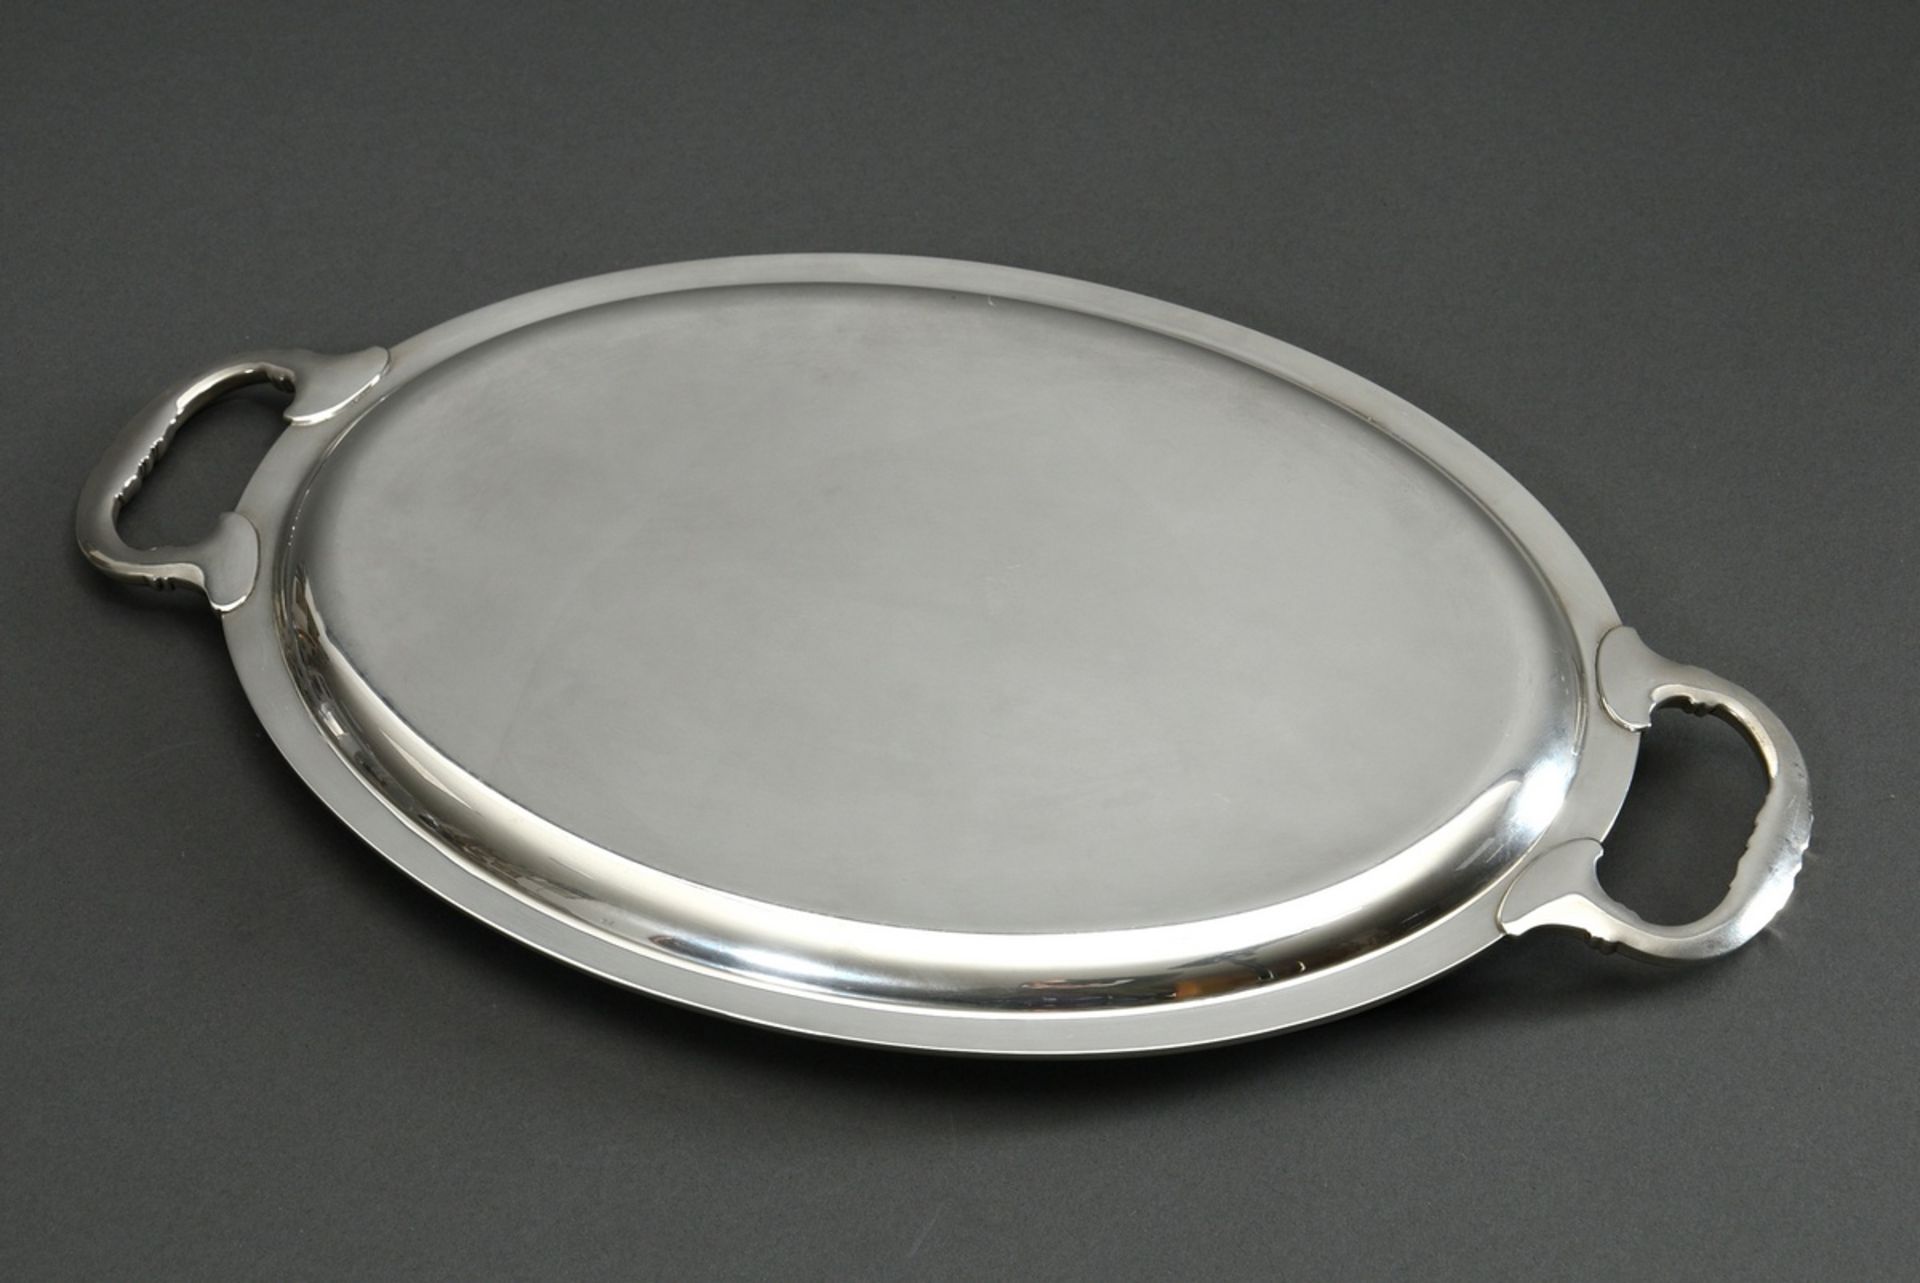 Oval tray in classical shape with relief rim and handles, silver 800, 525g, 41,6x24,6cm, slight sig - Image 3 of 3